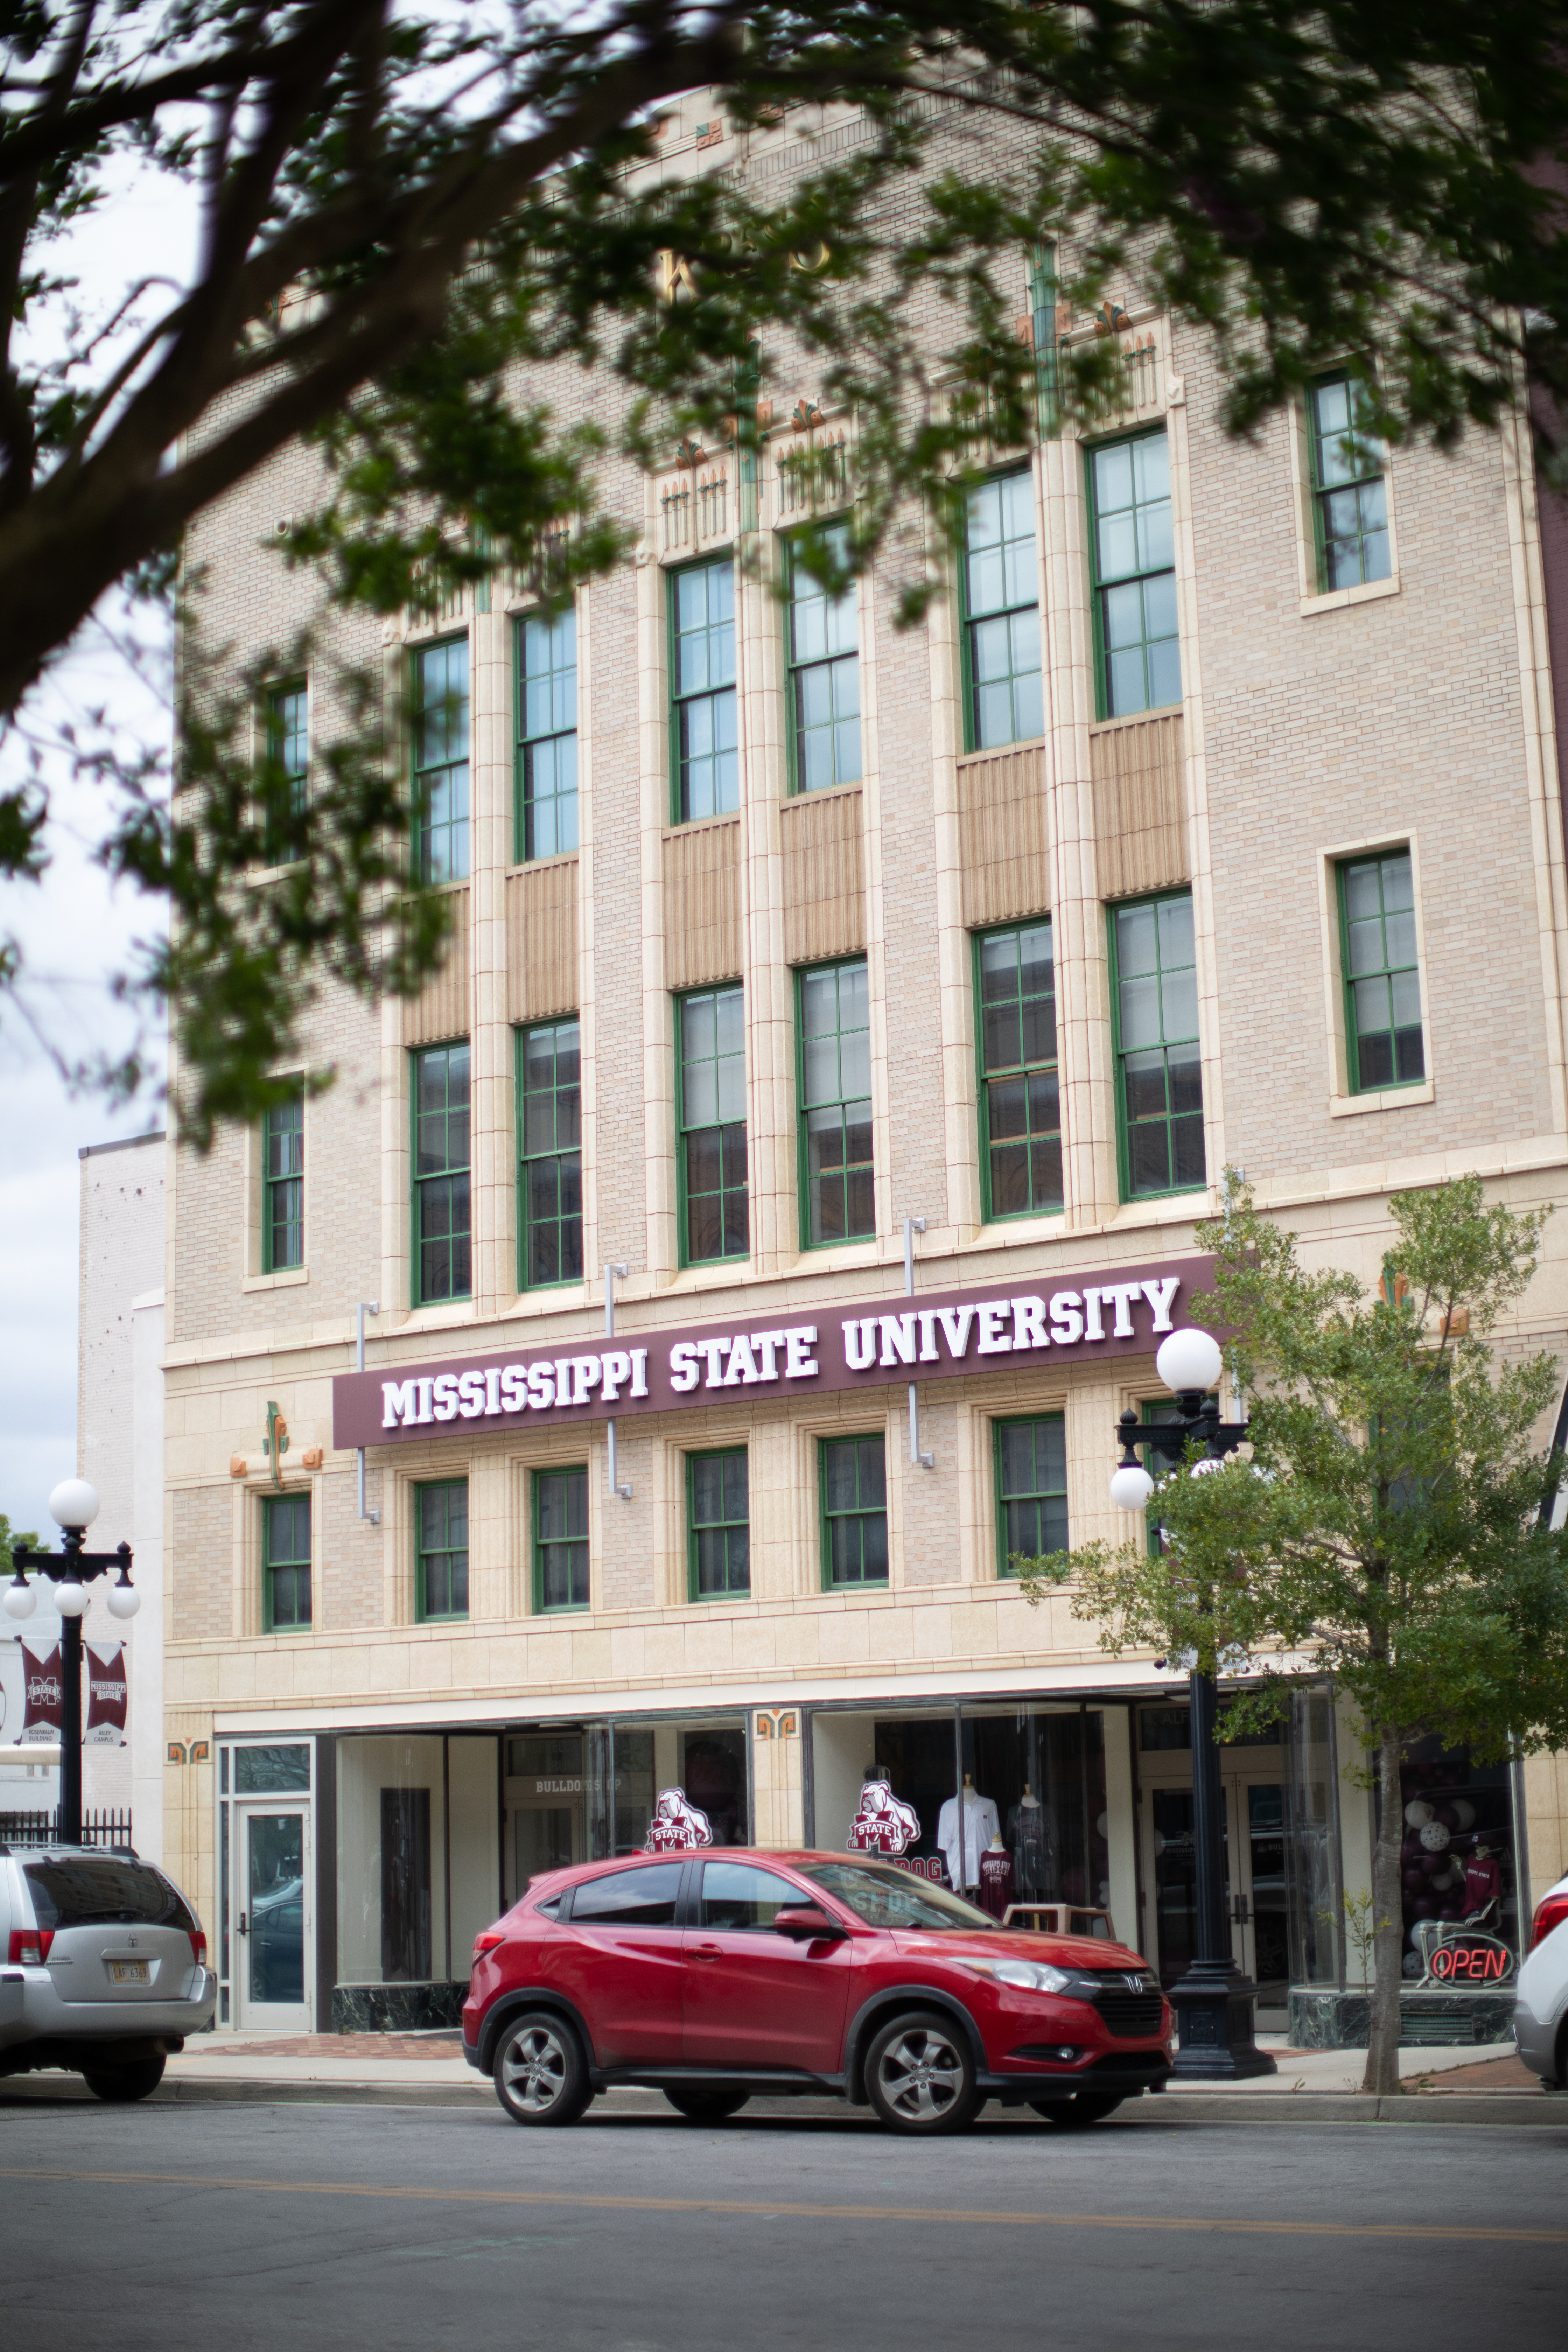 Rosenbaum Building through trees with light brick and tall windows and front sign "Mississippi State University"